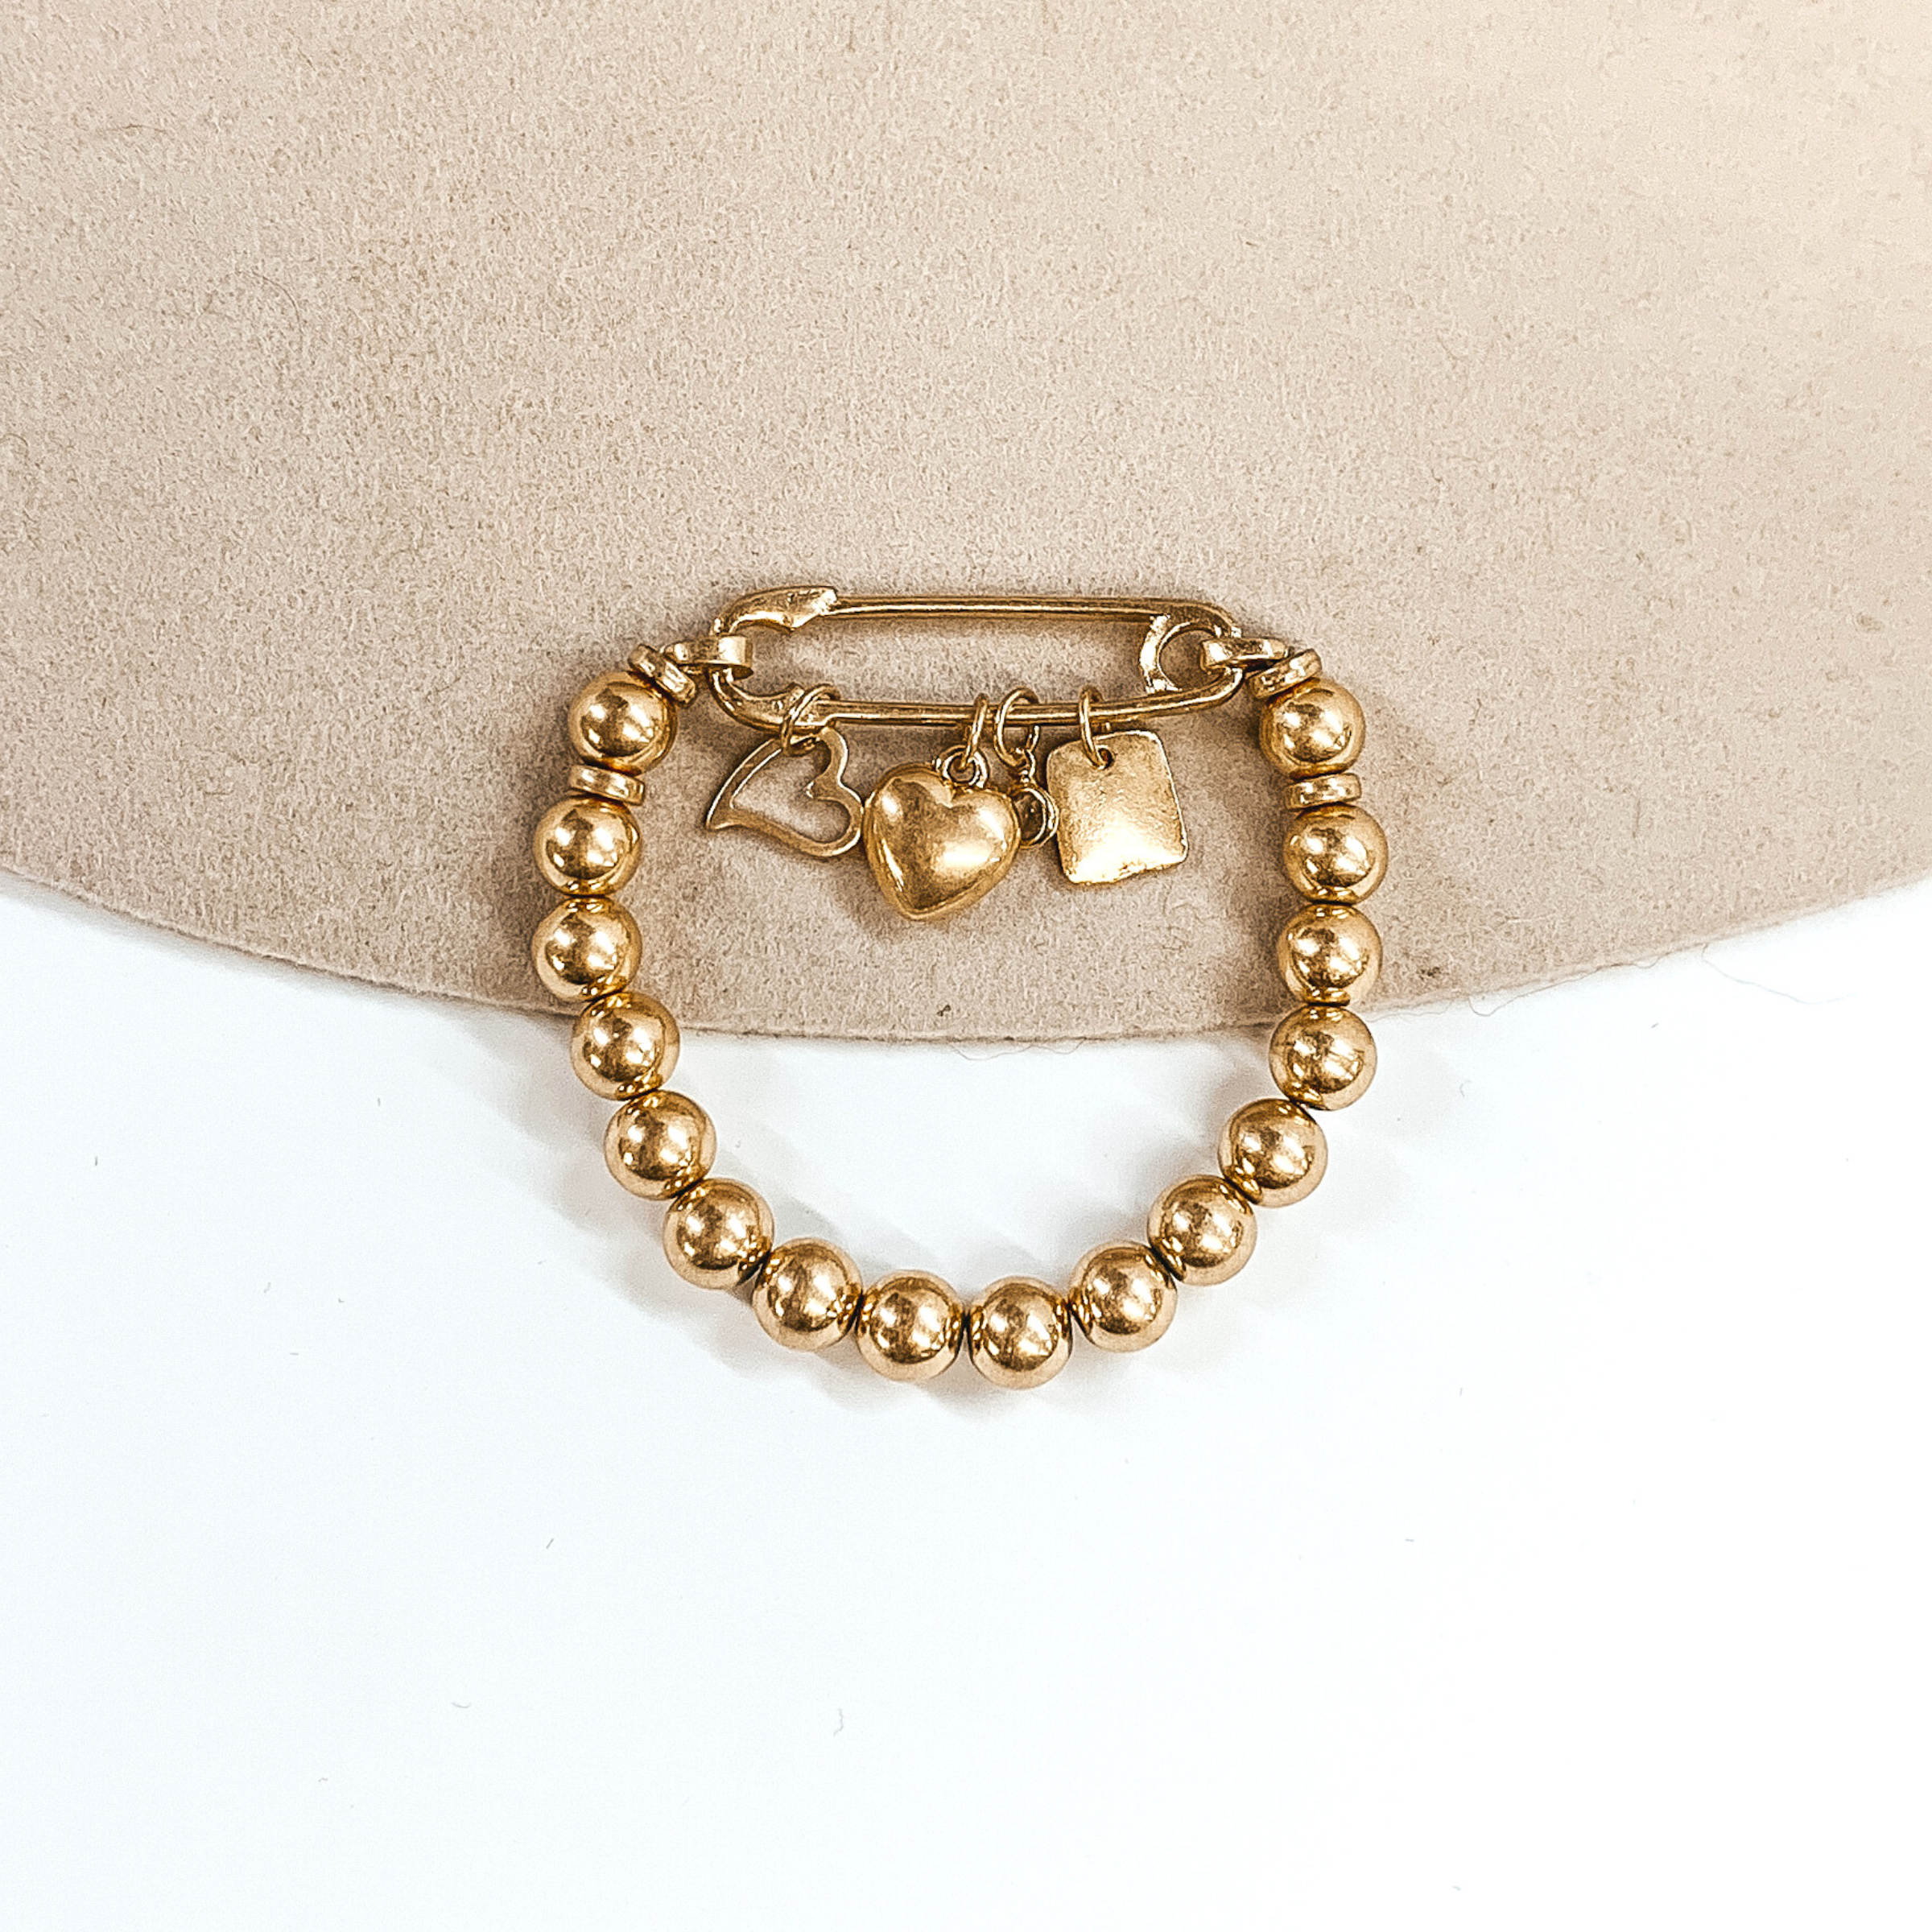 This is a gold beaded bracelet with a safety pin pendant closing the ends of the bracelet. Hanging on the gold safety pin are four gold charms including a square, a clear crystal, a heart, and an outlined heart. This bracelet is pictured on a beige and white background.